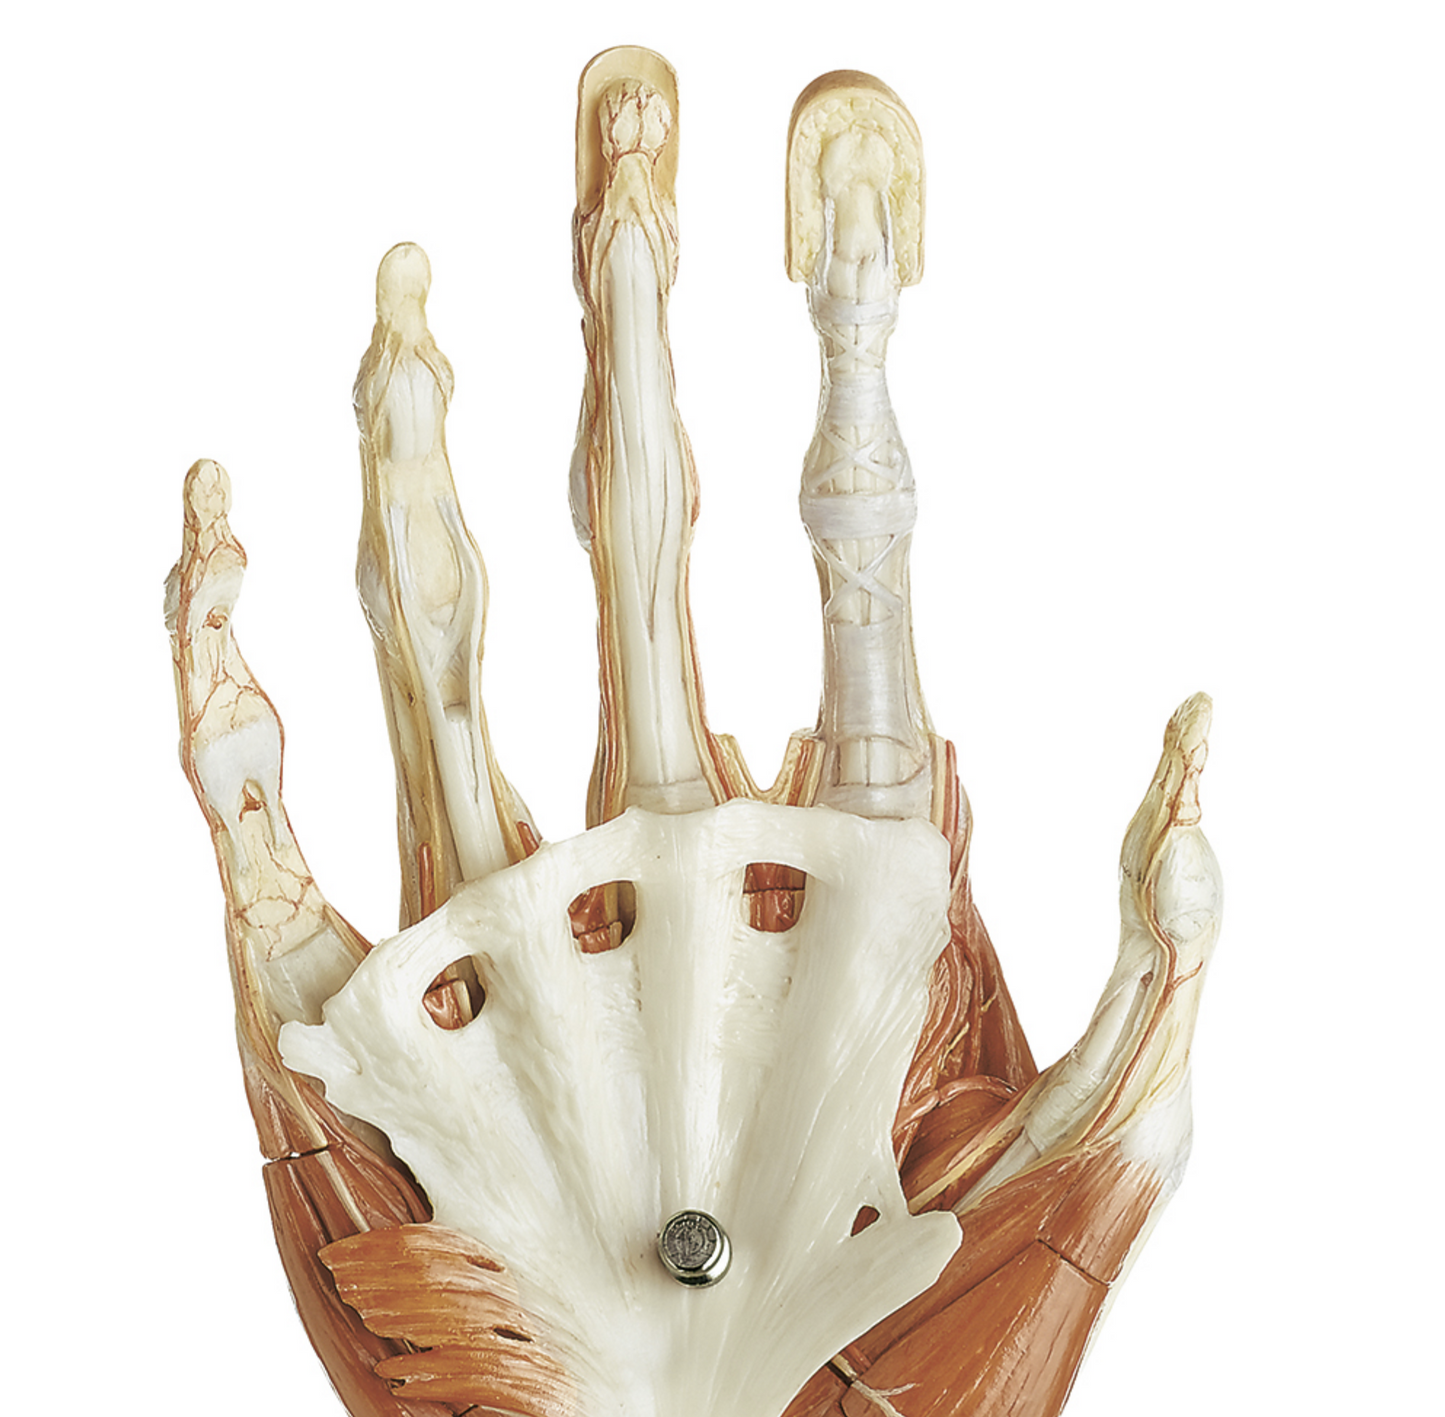 Advanced and highly detailed hand model - can be separated into 6 parts